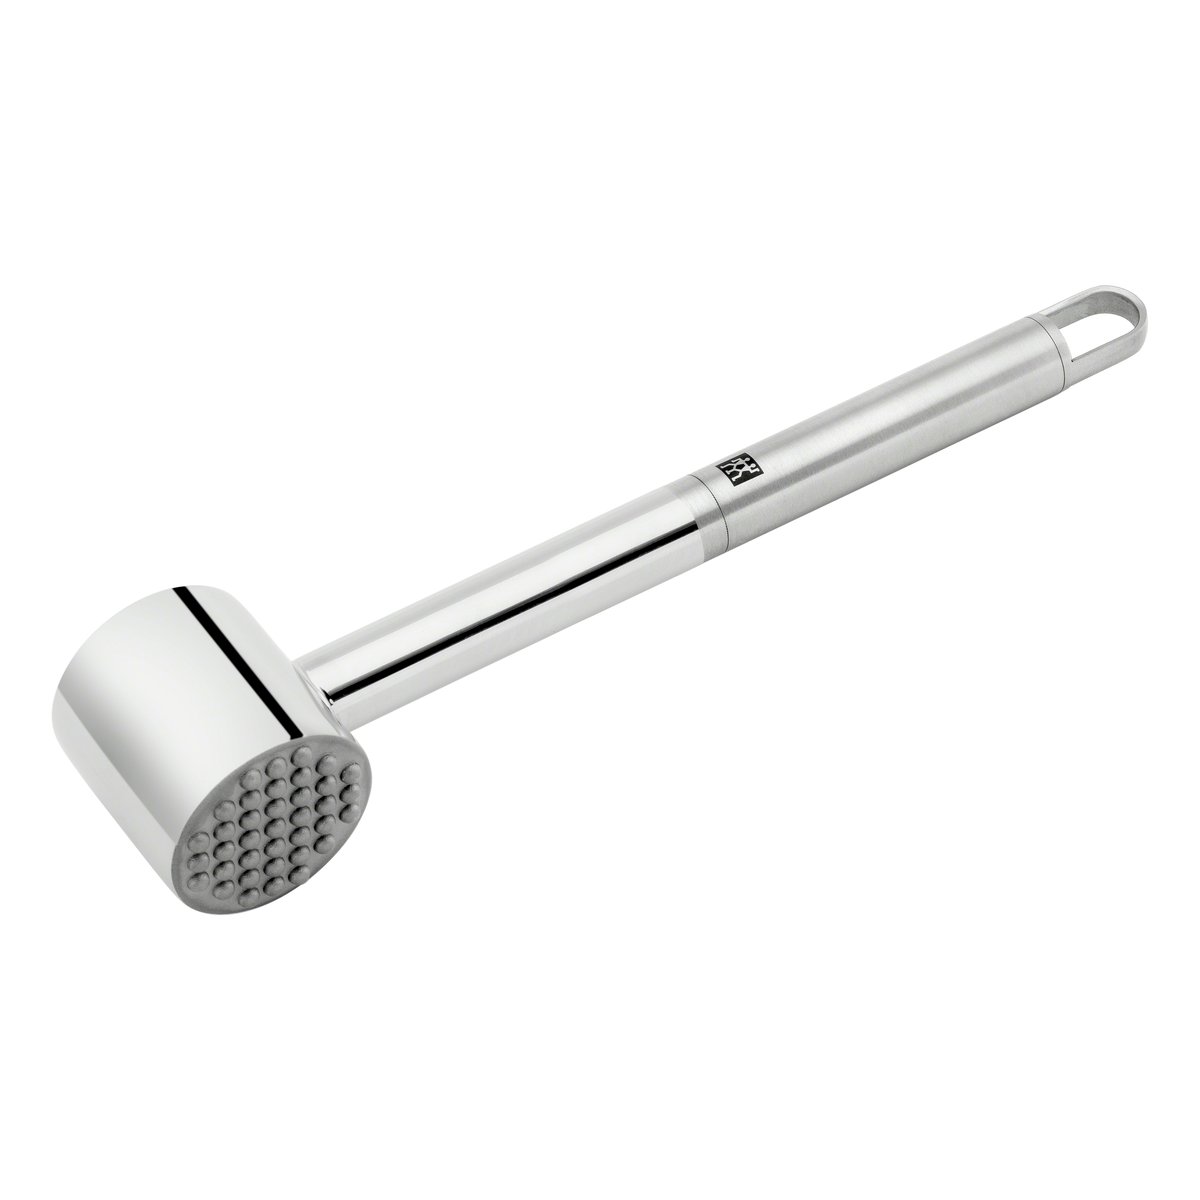 zwilling attendrisseur zwilling pro 27 cm